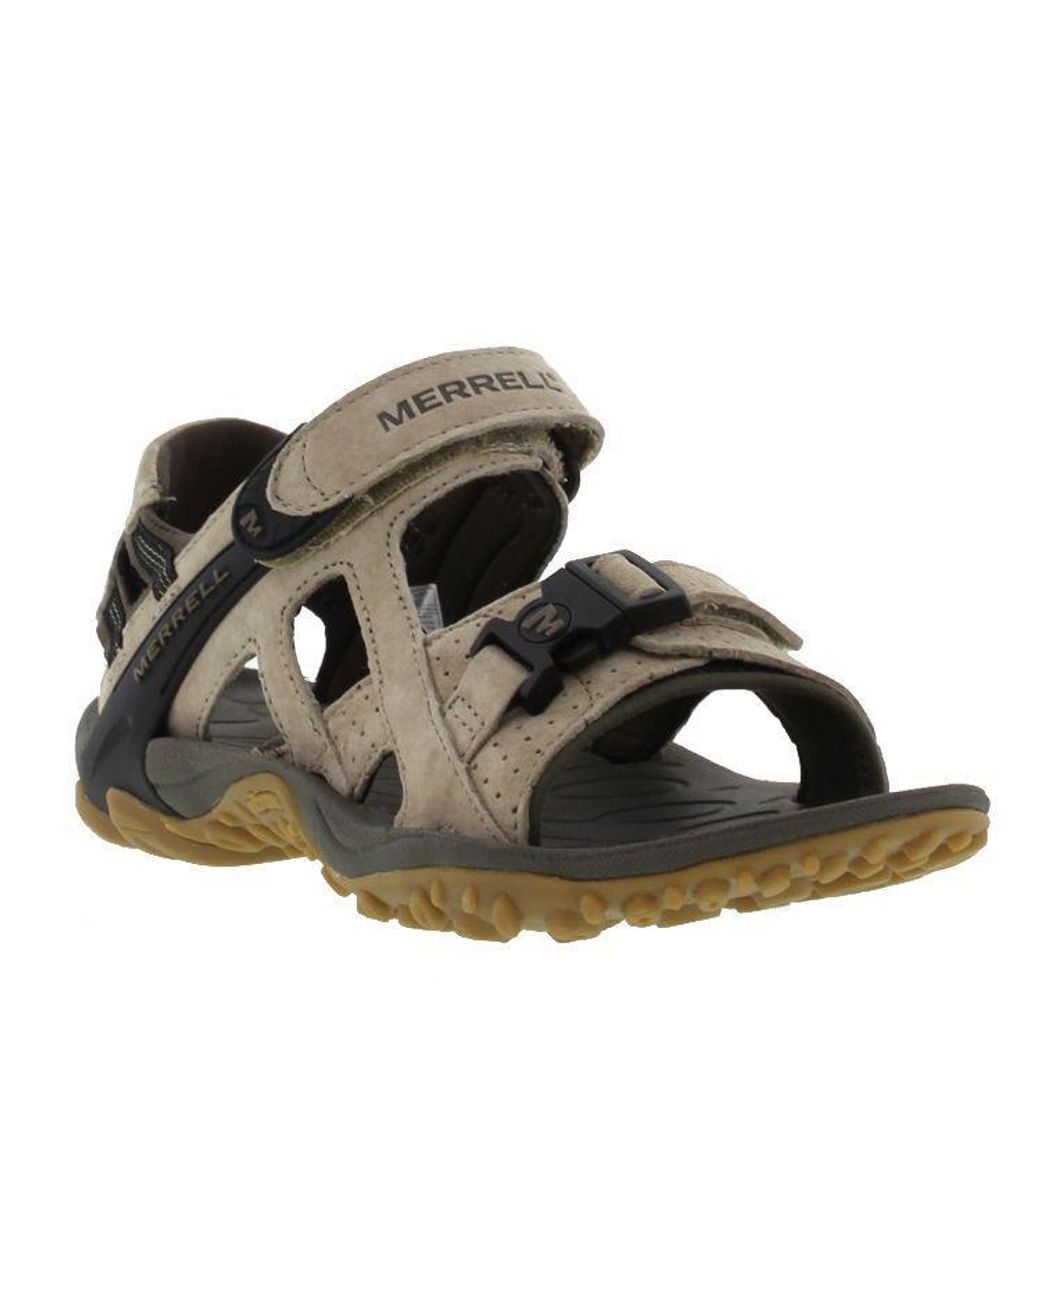 Men's Sandals Clothing, Shoes & Accessories Merrell Kahuna III Men's Sports  Walking Sandal J31011 Taupe NEW myself.co.ls